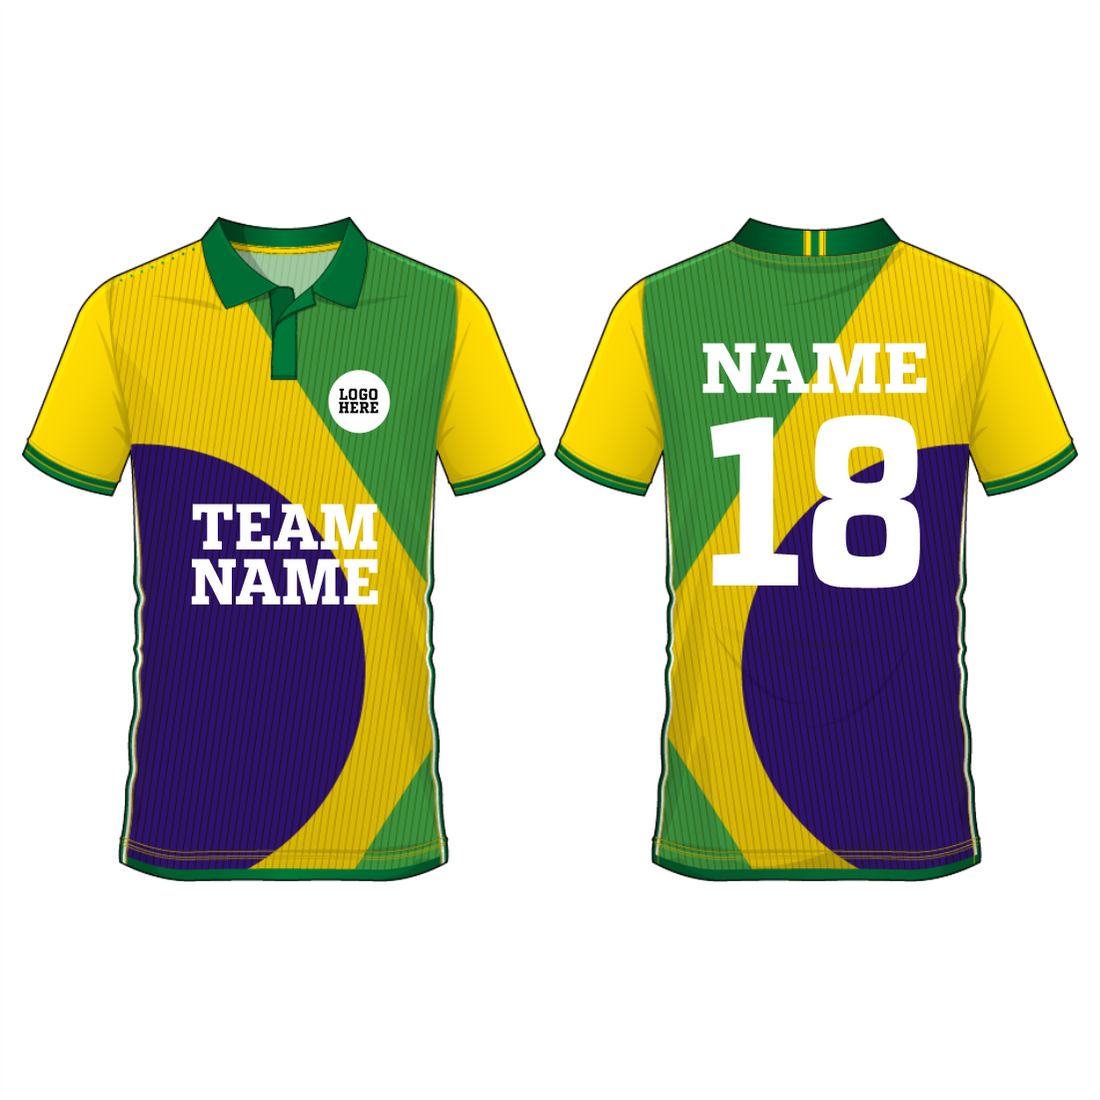 NEXT PRINT All Over Printed Customized Sublimation T-Shirt Unisex Sports Jersey Player Name & Number, Team Name And Logo.1115867531